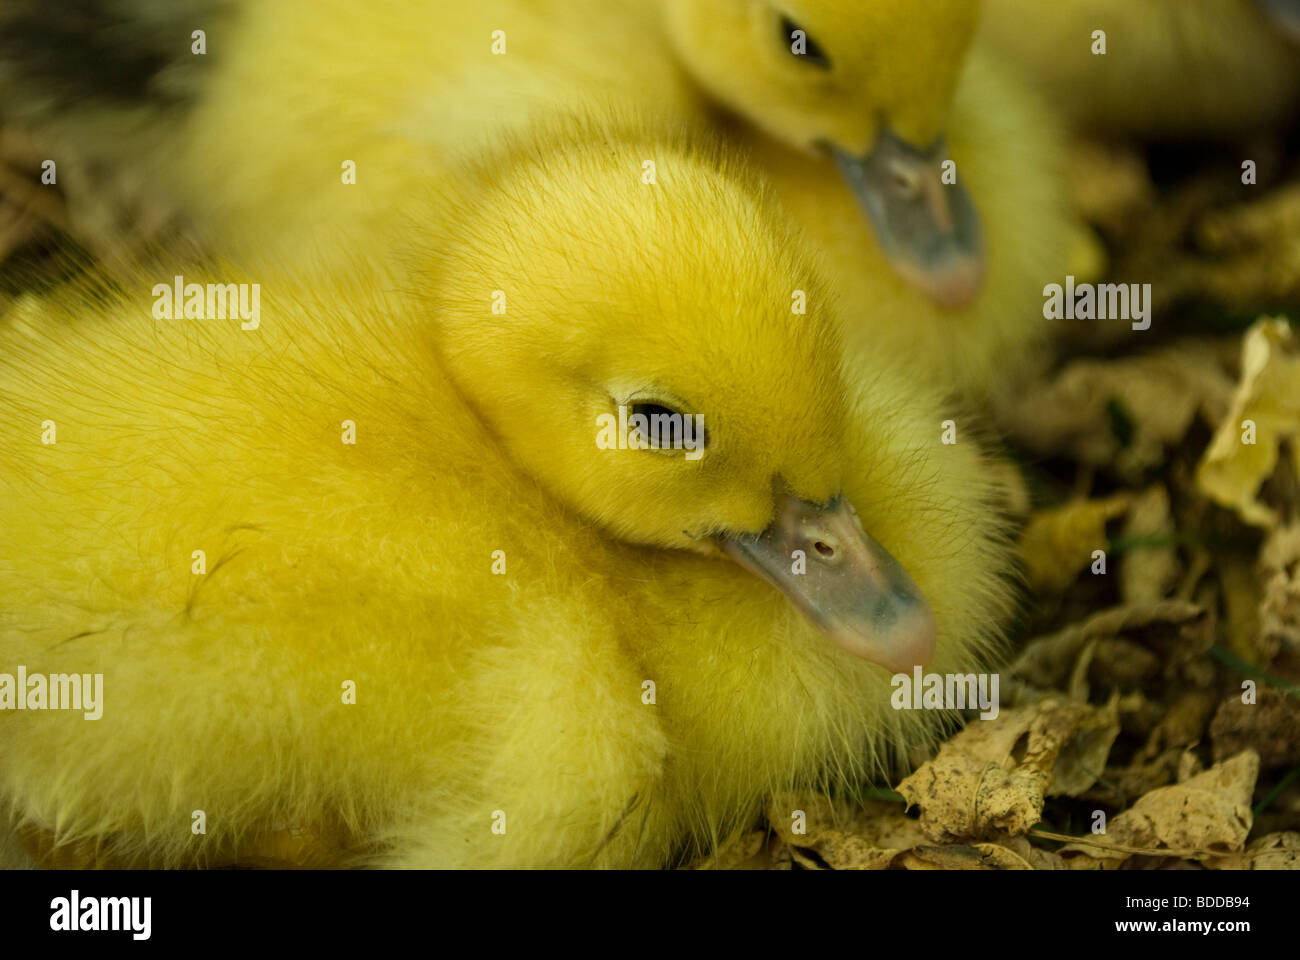 Muscovy ducklings, Arcanhac, France. Stock Photo